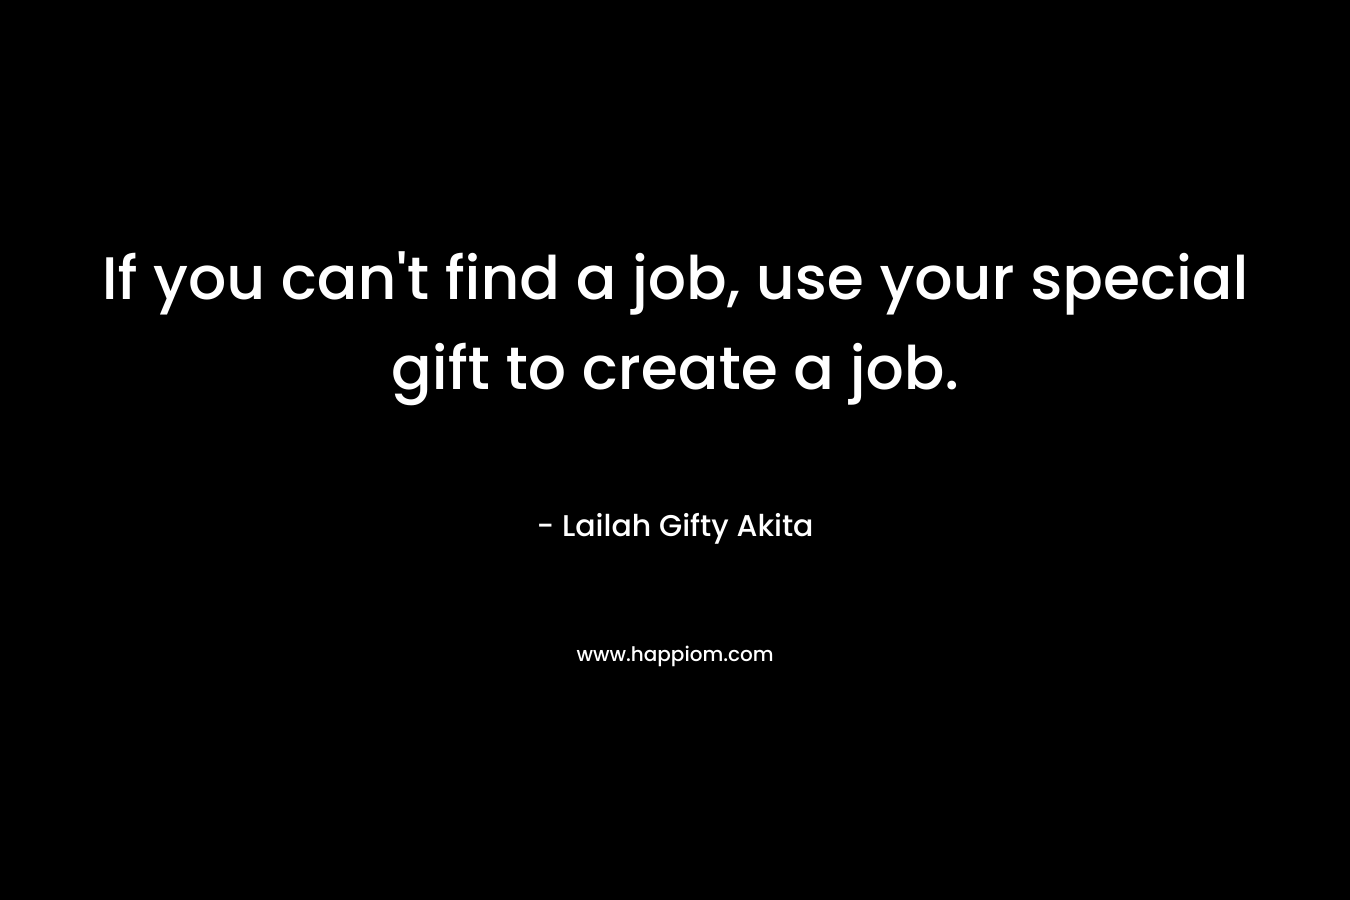 If you can't find a job, use your special gift to create a job.